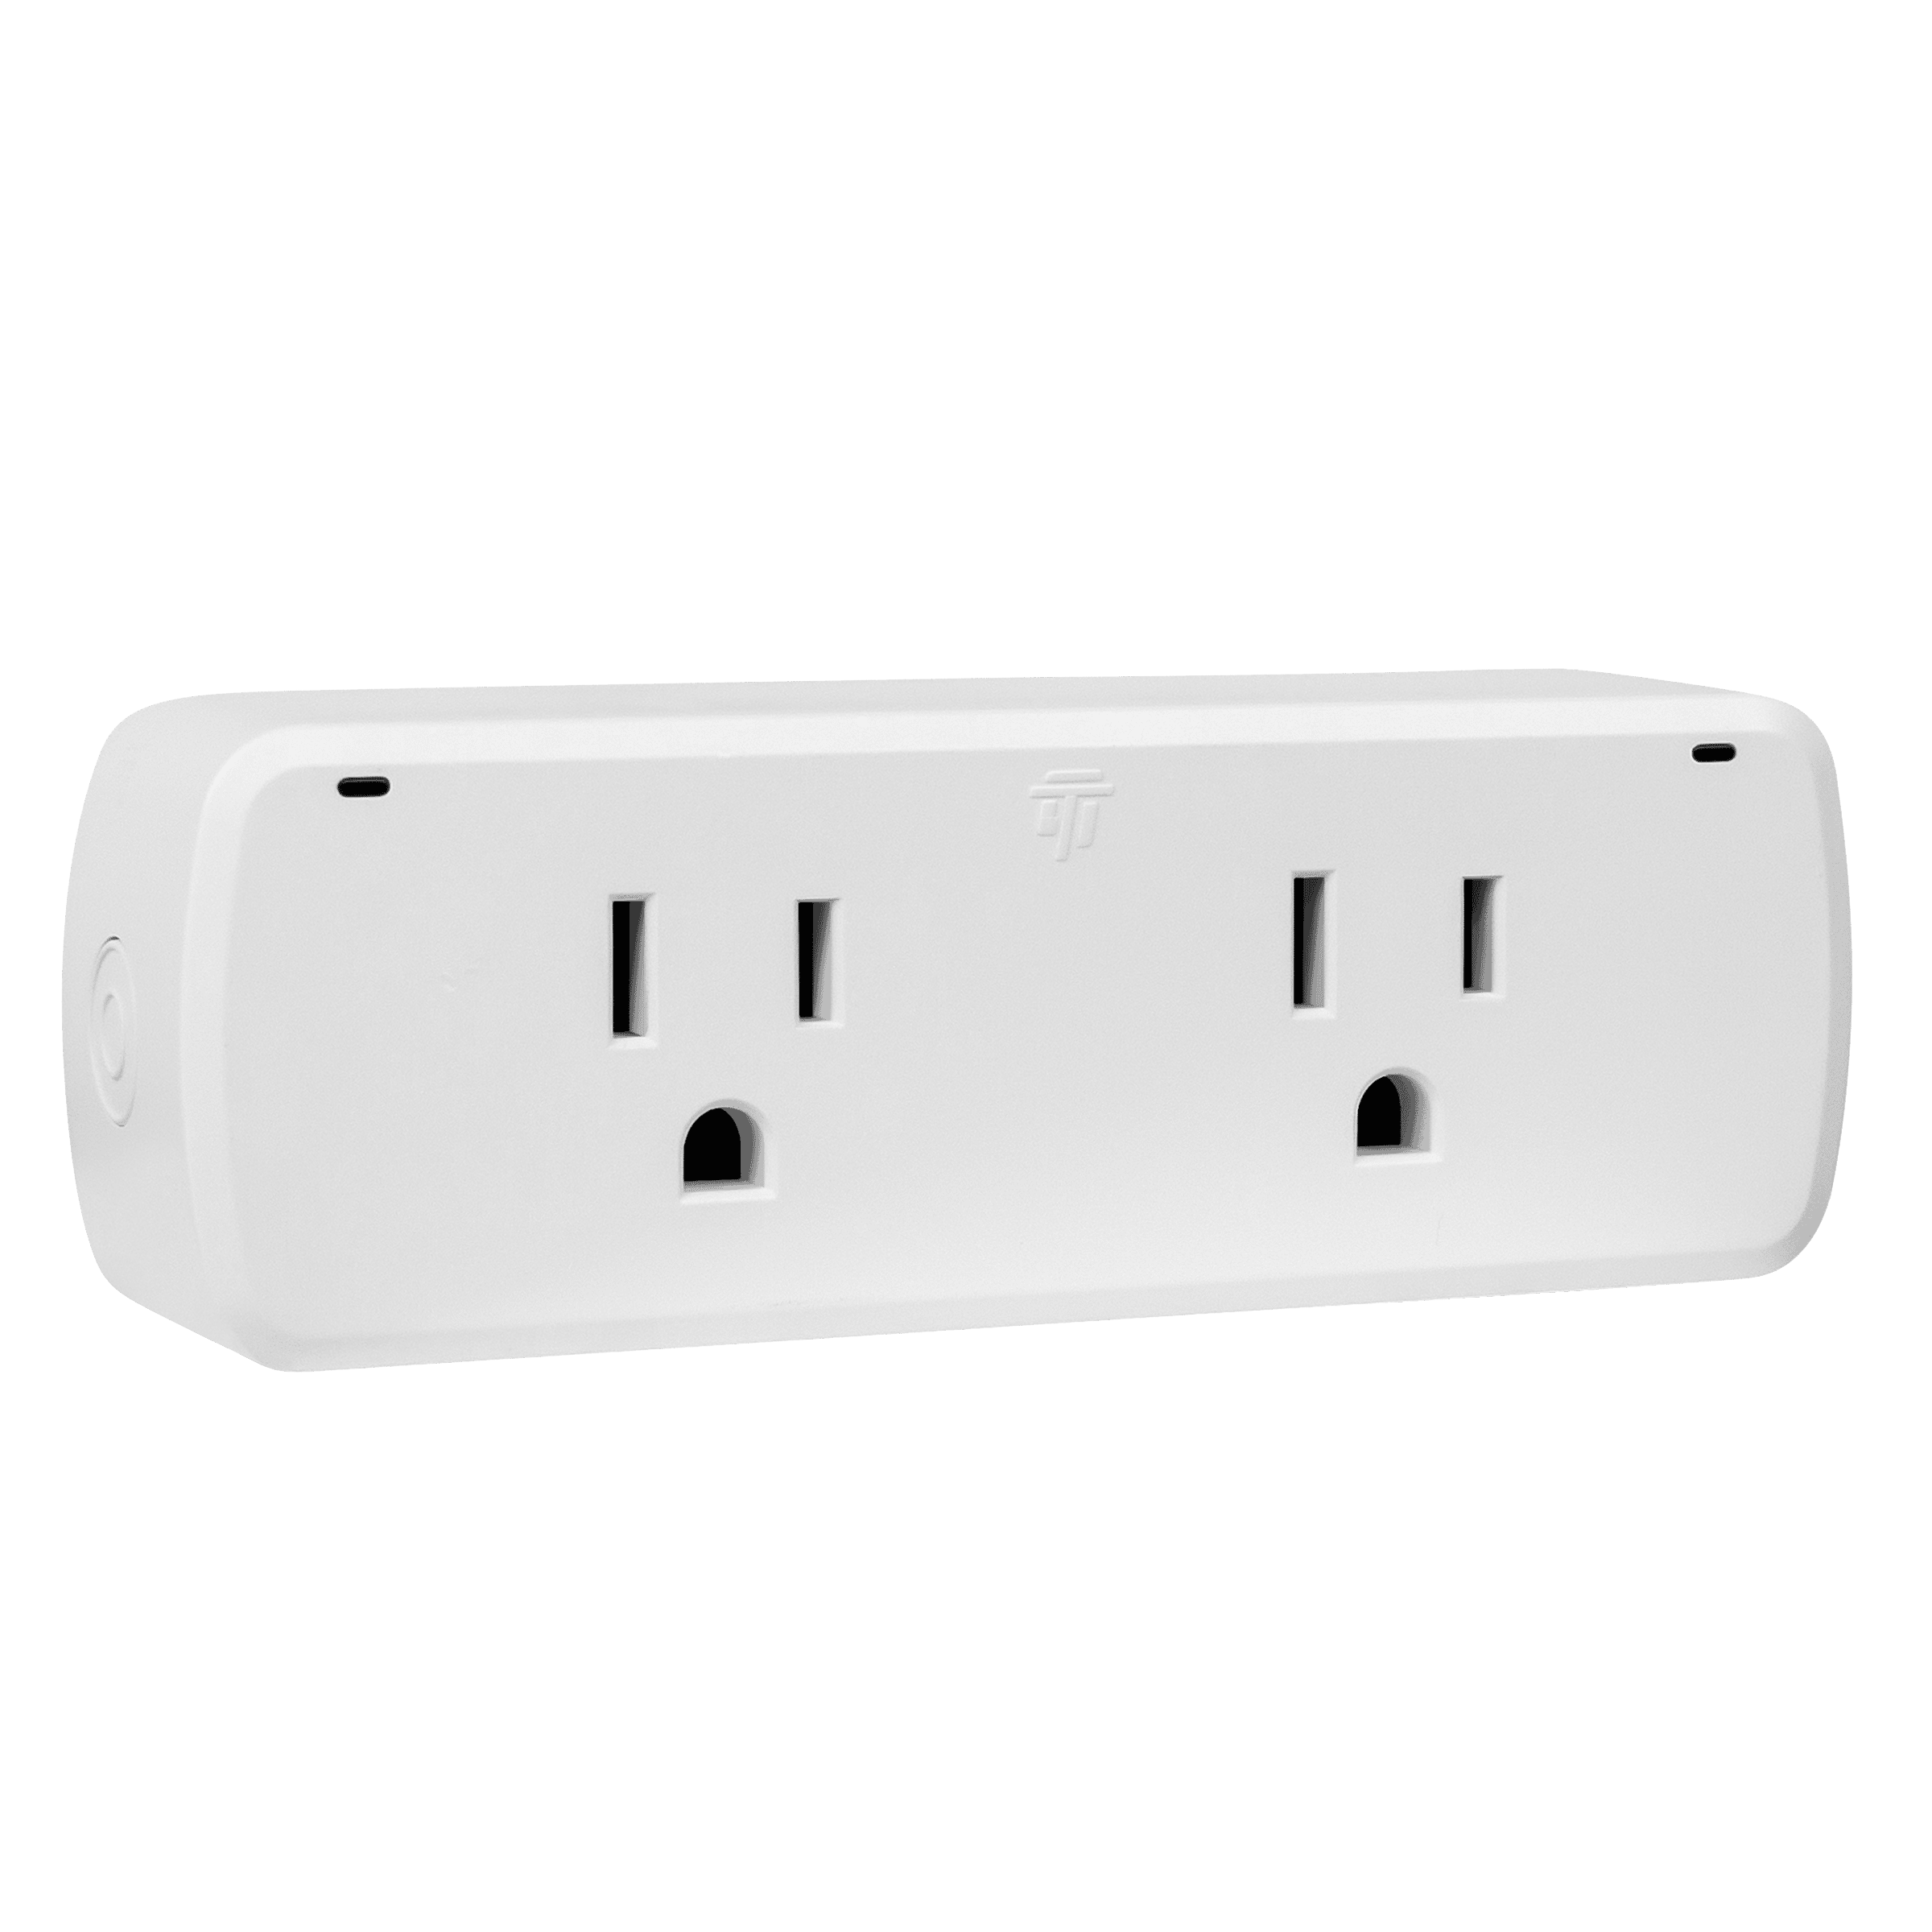 Smart Wi-Fi Plug with Energy Monitoring Dual Smart Outlets